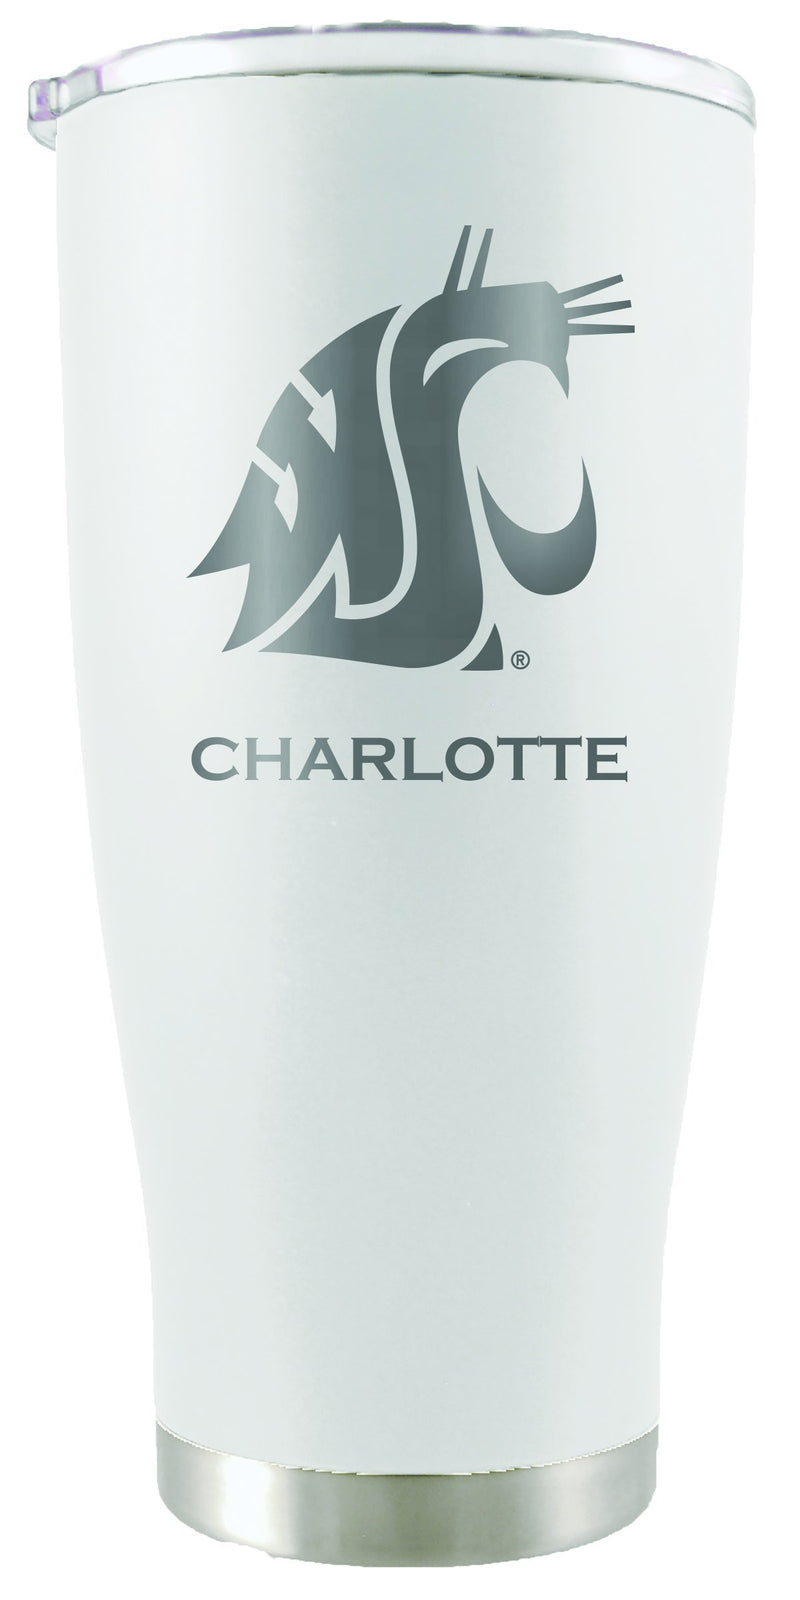 20oz White Personalized Stainless Steel Tumbler | Washington State
COL, CurrentProduct, Drinkware_category_All, Personalized_Personalized, WAS, Washington State Cougars
The Memory Company